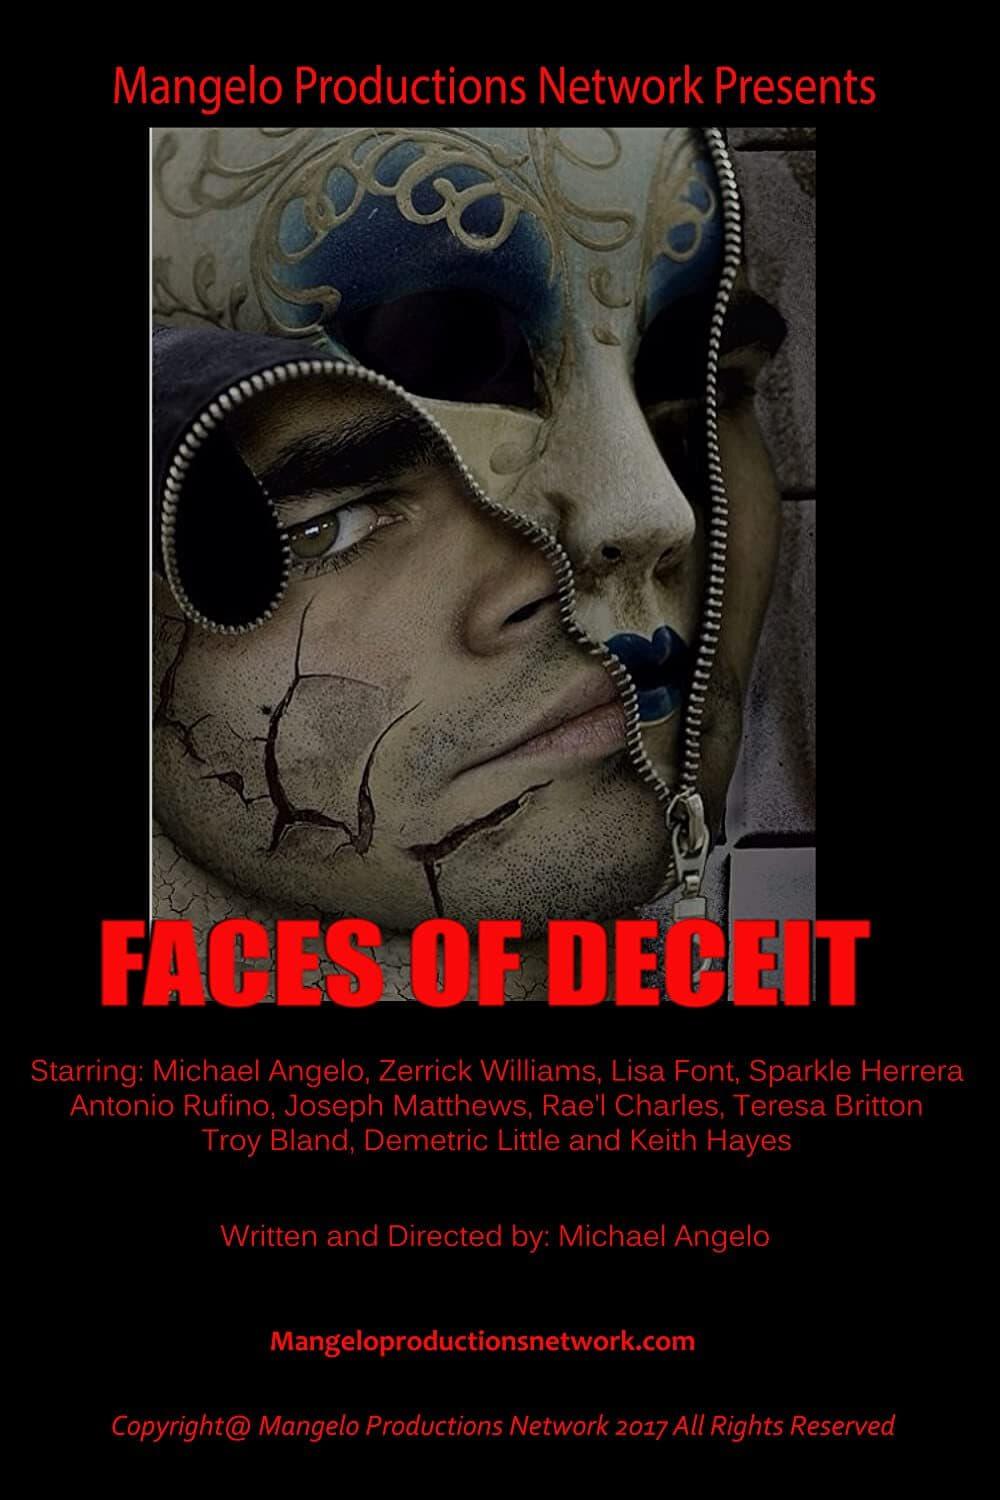 Faces of Deceit poster